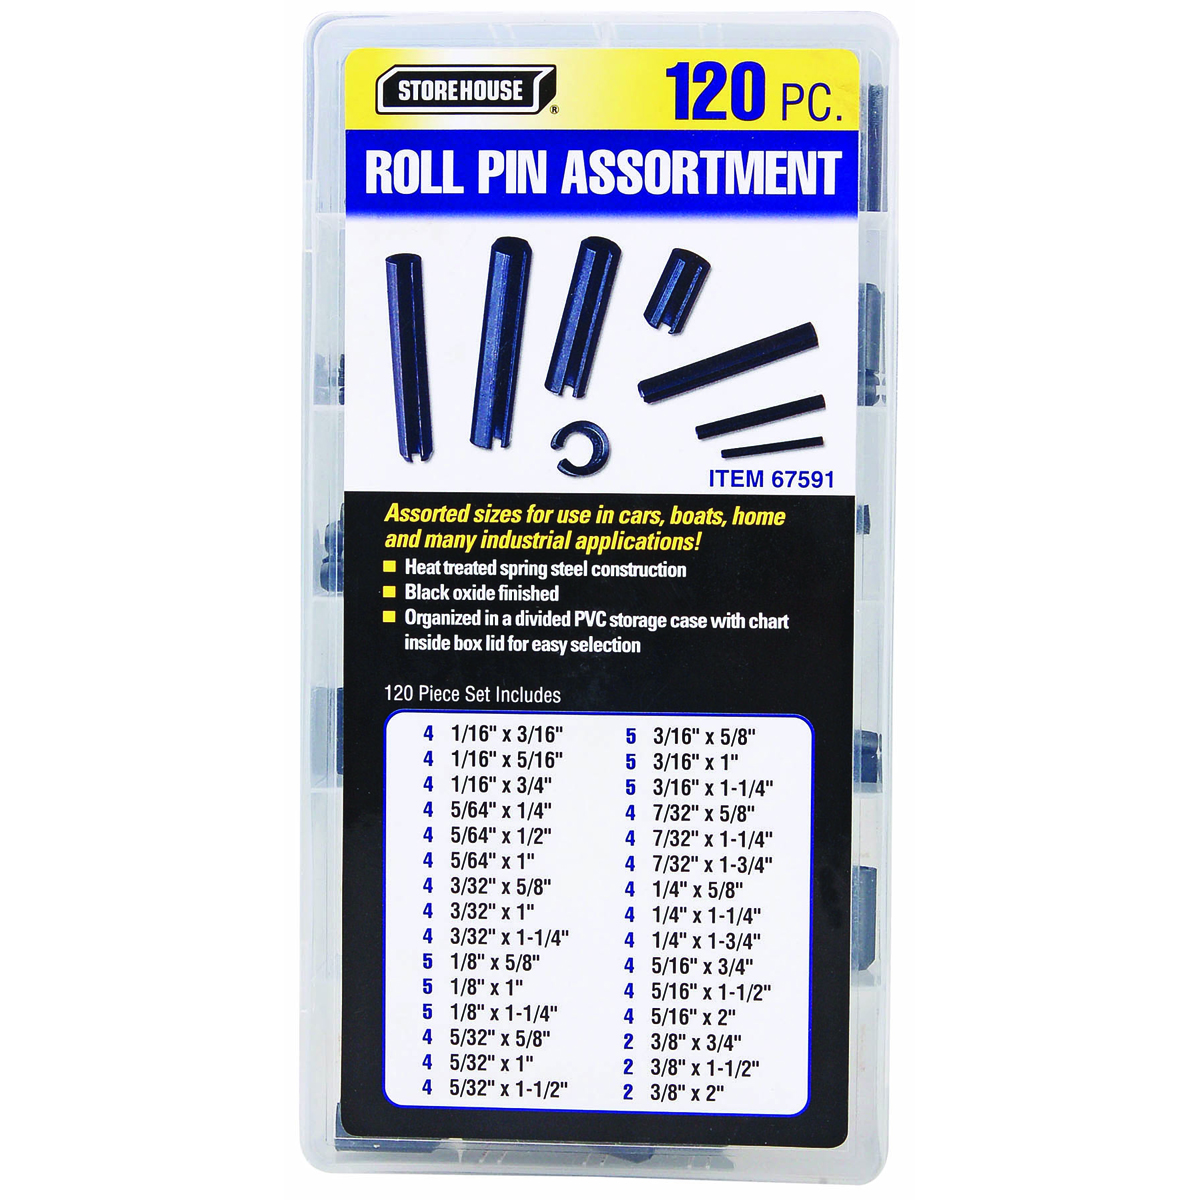 STOREHOUSE 120 Piece Roll Pin Storehouse - Item 67591